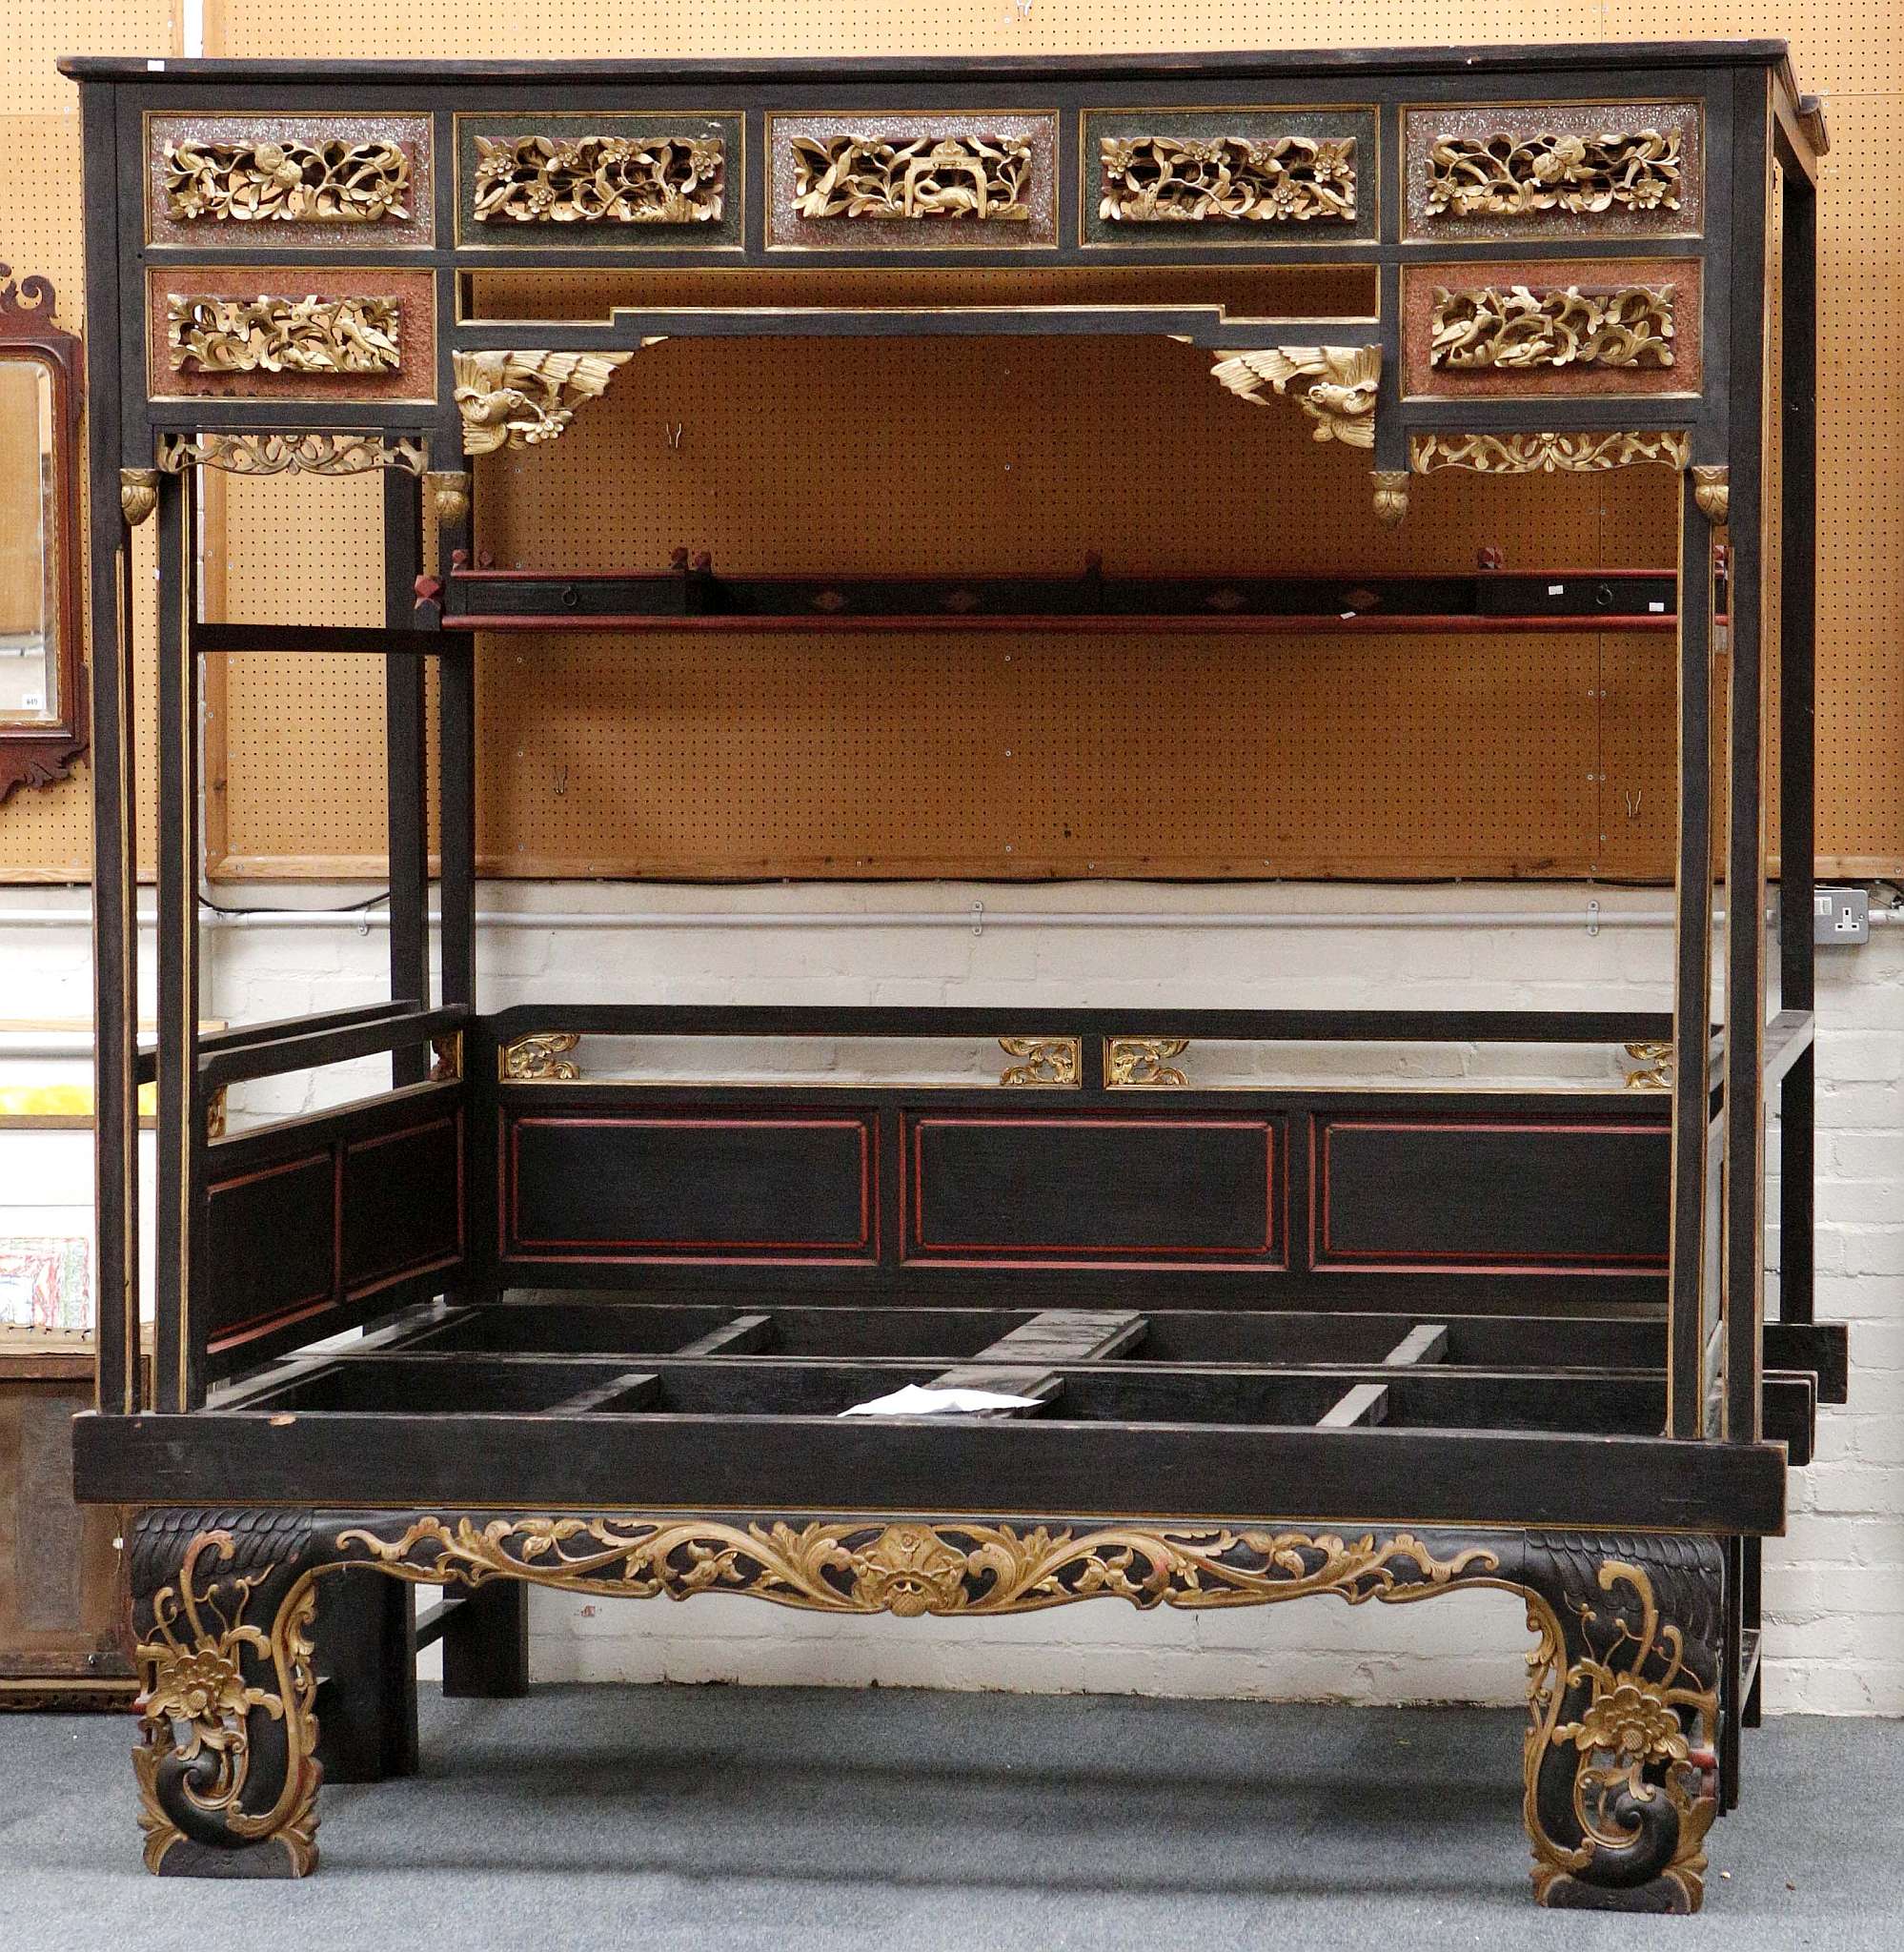 A Chinese four post canopy bed, Jiazichuang, with carved and pierced open-work panels to the top and